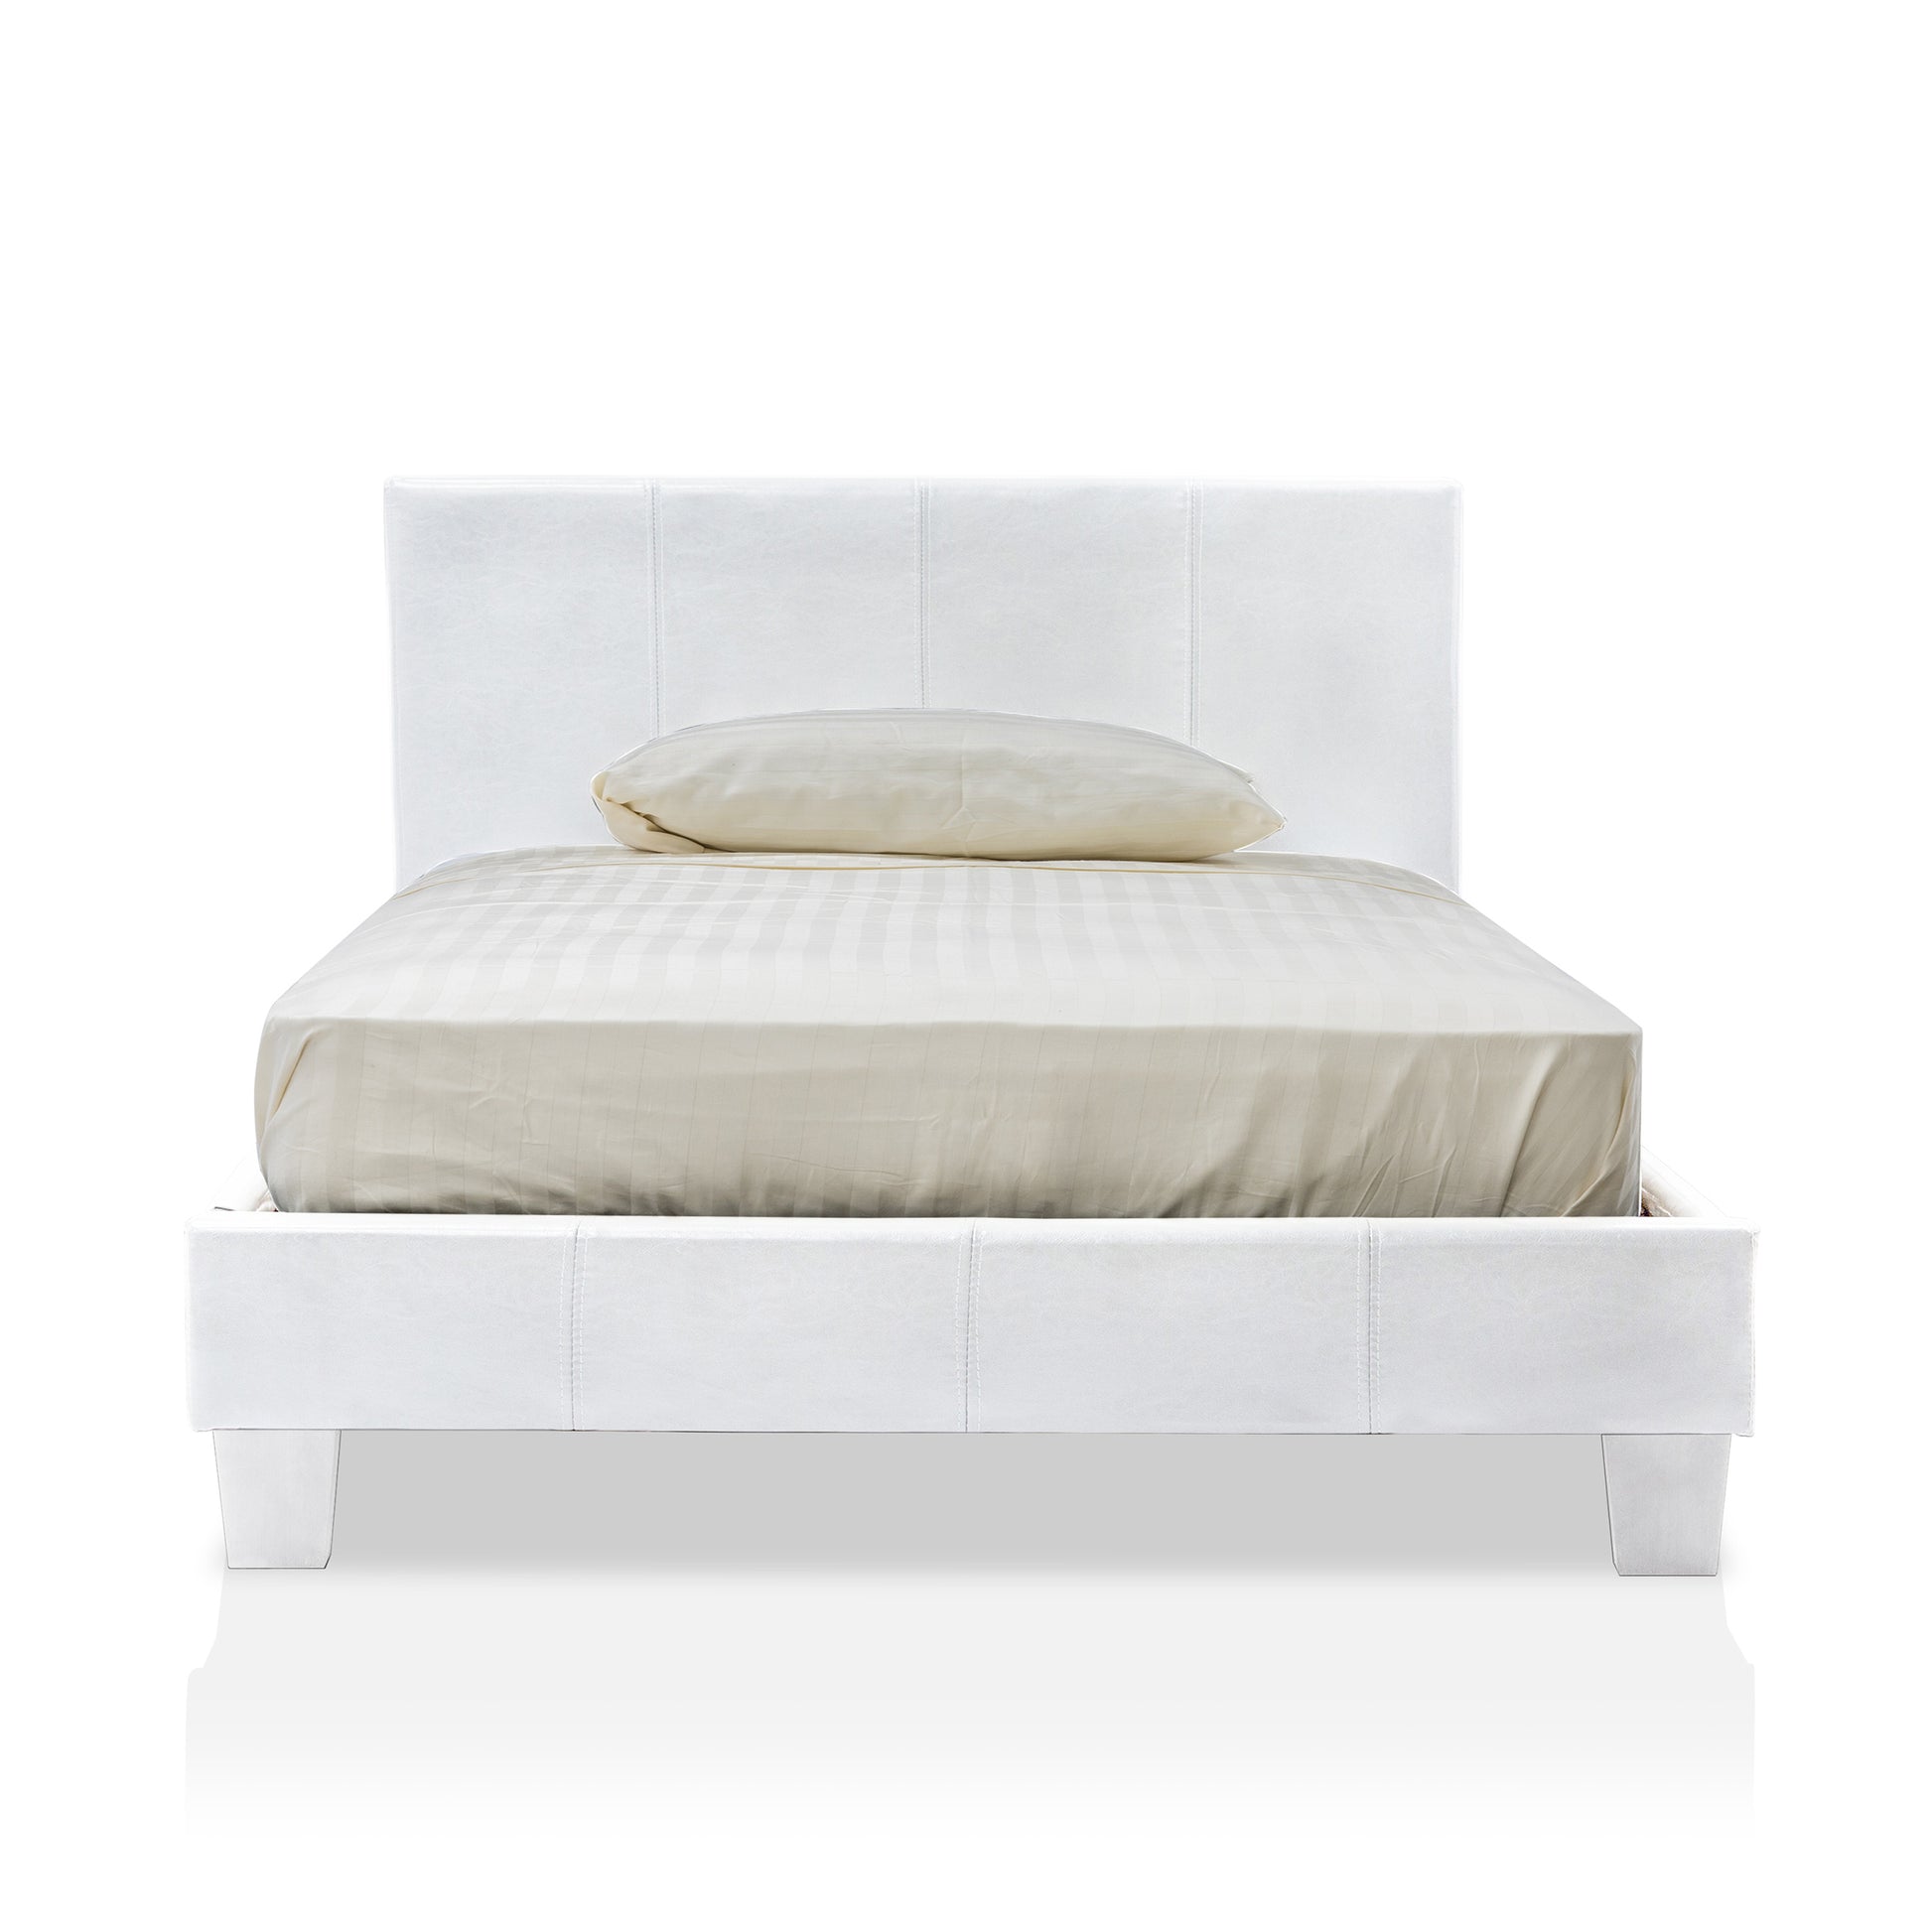 Front-facing contemporary white faux leather full platform bed with linens on a white background